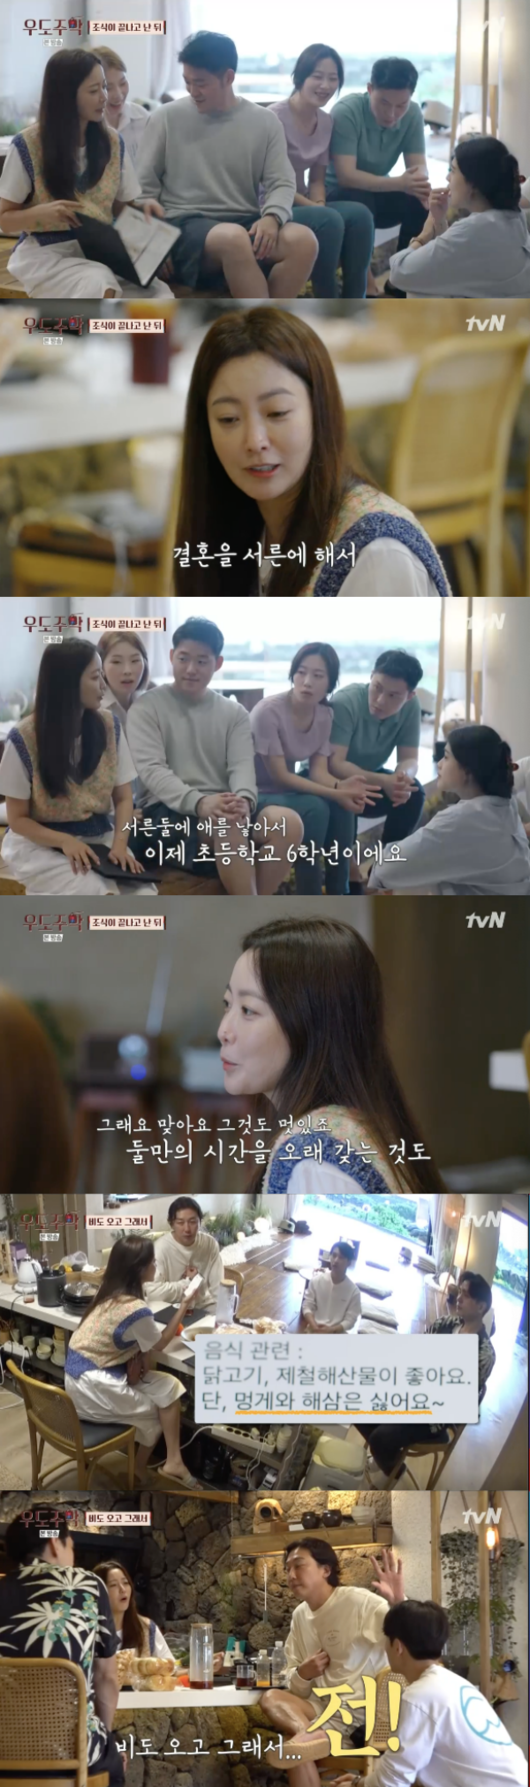 Udo main film Kim Hee-sun expressed regret about the short honeymoon life.In the TVN entertainment Udo Jumak, which was broadcast on the night of the 26th, Kim Hee-sun talked frankly with Newlyweds who visited the main film.The chatter began with the guests and Kim Hee-sun asked about the second year, and one customer said, I have a plan next year. Another customer said, I do not think yet.Kim Hee-sun said, I like spending a long time with you. I had a short honeymoon. I was a little sad to be a child in six months.I think that the honeymoon I think personally is about a year short.  I think it is possible to take it slow because everyone is still young. The main staff presented a set of knives and chopping boards to help the Newlywedss. The three couples who visited the second day of business checked out in a friendly atmosphere.A wind warning was issued in Jeju and Kim Hee-sun was worried.I called Newlyweds to check the schedule and said, If you can not get tied up, I will provide you additional accommodation.Among the third incoming Newlyweds, there was a team that disliked seafood and the Udo team held a meeting.Tak Jae-hun suggested, How about me because it rains? Yu Tae-oh said, I am from Germany, so I will try to do a school with Porco Rosso.Kim Hee-sun was delighted that the pregnant woman wanted the Black Porco Rosso. Tak Jae-hun said, How about the handmade cost?Lets put the potatoes in and dig them in and go to the holiday atmosphere. So all the main family members left to see the chapter.Ryu Deok-hwan and Yoo Tae-o were ready to meet guests and the first guest, a Newlyweds couple, arrived; the couple were in the accommodation business in the Hanok village.Tak Jae-hun, who heard the news, said, Are you here now? The rest of the couple arrived and Kim Hee-sun provided a welcome.Ryu Duk-hwa introduced his Udo with his special skills.The last couple arrived was the police department, who had packed up a full set of equipment, describing it as a device to ride a Hallasan.Tak Jae-hun quipped numbly, How do you want to get in the mood when theyre riding Hallasan? Then he said, Or do you want to get in the rhythm?Then come here and have some coffee. During the break, Tak Jae-hun called his daughter. Tak Jae-hun said, How are you? My dad is trapped in Udo now. My back hurts so much.The daughter said, It will be completely difficult. Take a massage. Tak Jae-hun finished a short call saying, Have fun with your friend.He was also on the break, and he was making food. He crushed potatoes with butter to make mashed potatoes.By evening, Newlyweds were provided with appetizers, zucchini and tofu.Newlyweds enjoyed romance and ate their own pans and Kim Hee-sun served immaculate cloud makgeolli with a drink to serve before.It was followed by the main menu, the seafood handmade, and the dessert brownies baked by Ryu Deok-hwan. Newlyweds enjoyed a friendly dinner.Tak Jae-hun asked police and couples, What do you do? And was embarrassed by the word police officer.Its so cool, Kim Hee-sun said, and Yoo Tae-o made a hacken for six hours and the Newlyweds admired the taste.Kim Hee-sun provided a clear sow made from 100 days of aging glutinous rice and yeast with a drink and a drink.Then, seafood clam handmade soup with Jeju Island taste was provided, and Tak Jae-hun performed the song proud with Newlyweds who finished the meal full.Kim Hee-sun, who was excited, got a hot response by singing the pop song L.O.V.E.TVN entertainment Udo main screen screen capture